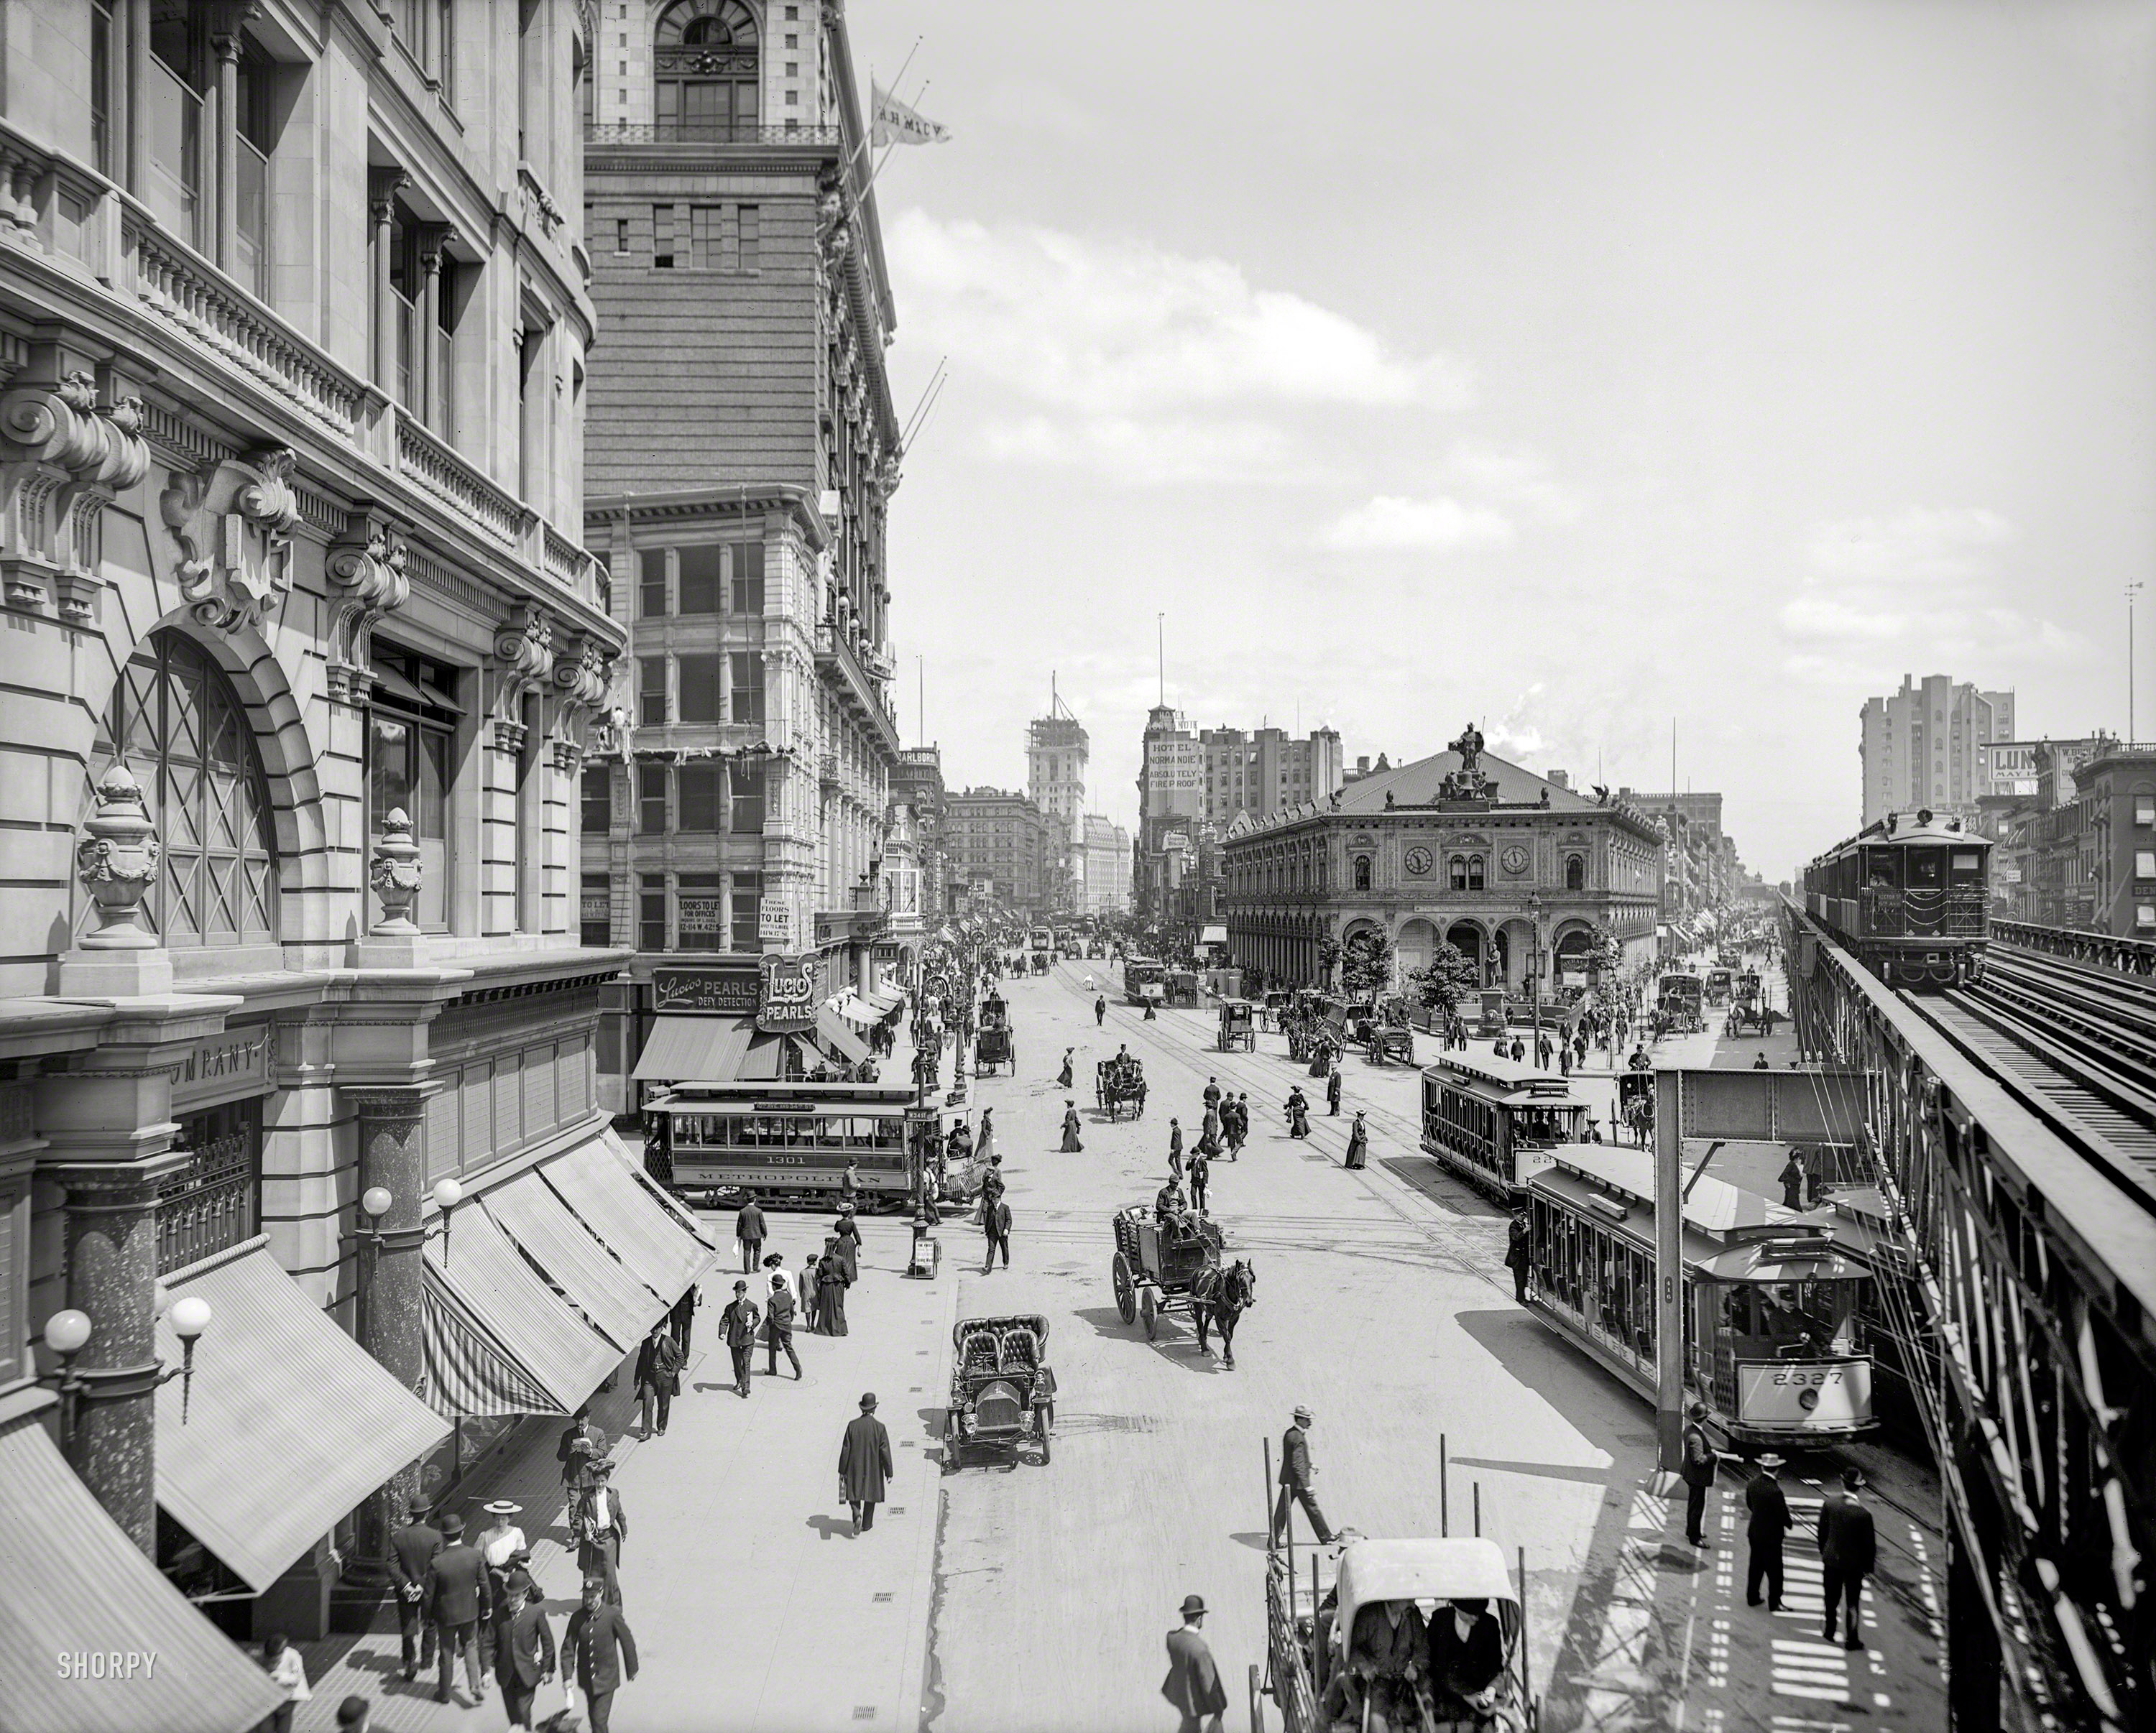 Circa 1903. "Herald Square, New York." With Times Square in the distance, and the New York Times building going up at center. Other landmarks include Macy's, the New York Herald newspaper building, Sixth Avenue elevated tracks and Hotel Astor. 8x10 inch glass negative, Detroit Publishing Company. View full size.